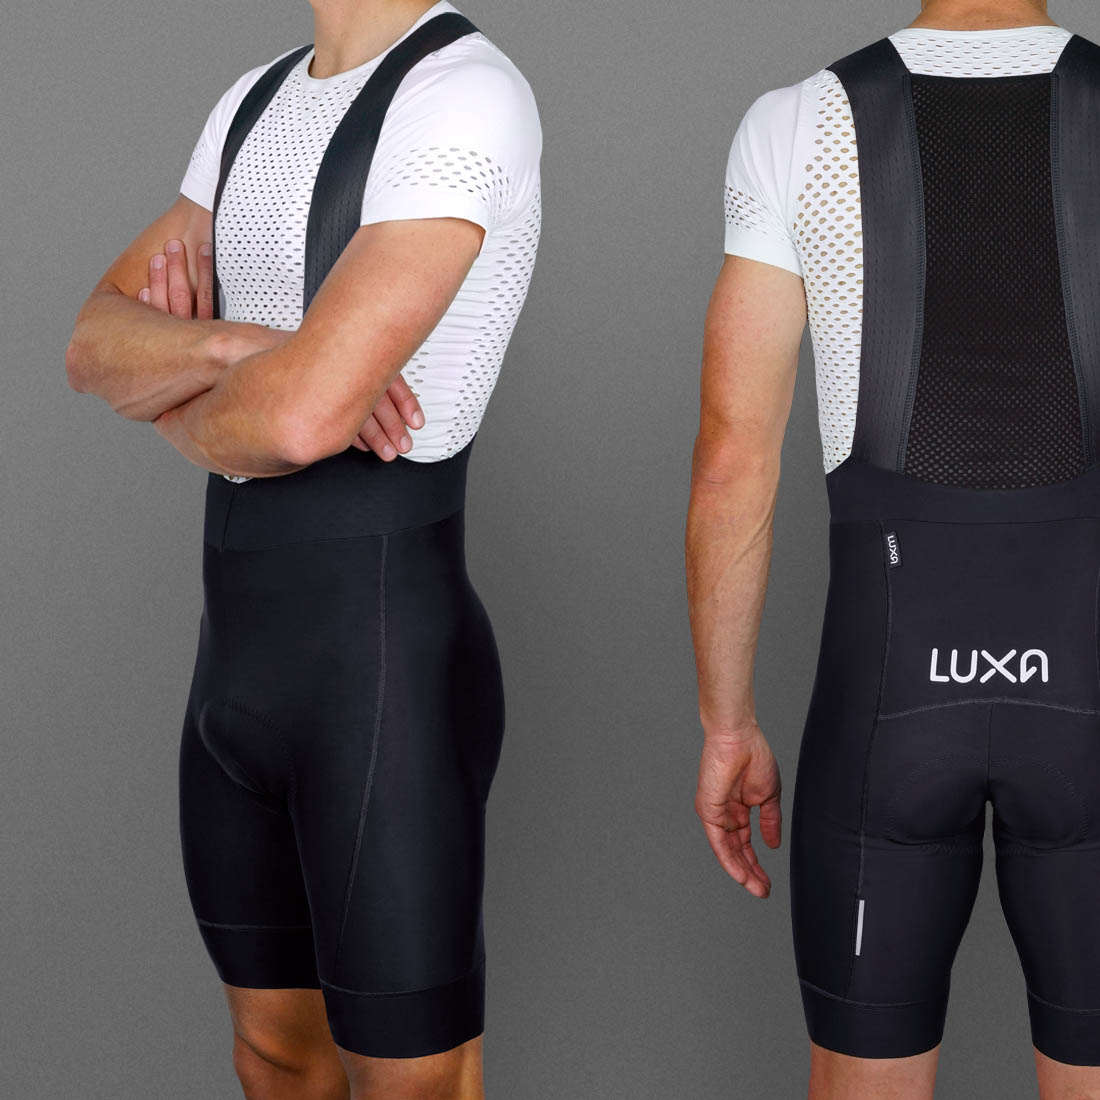 Cycling clothing essential in the wardrobe of every cyclist.